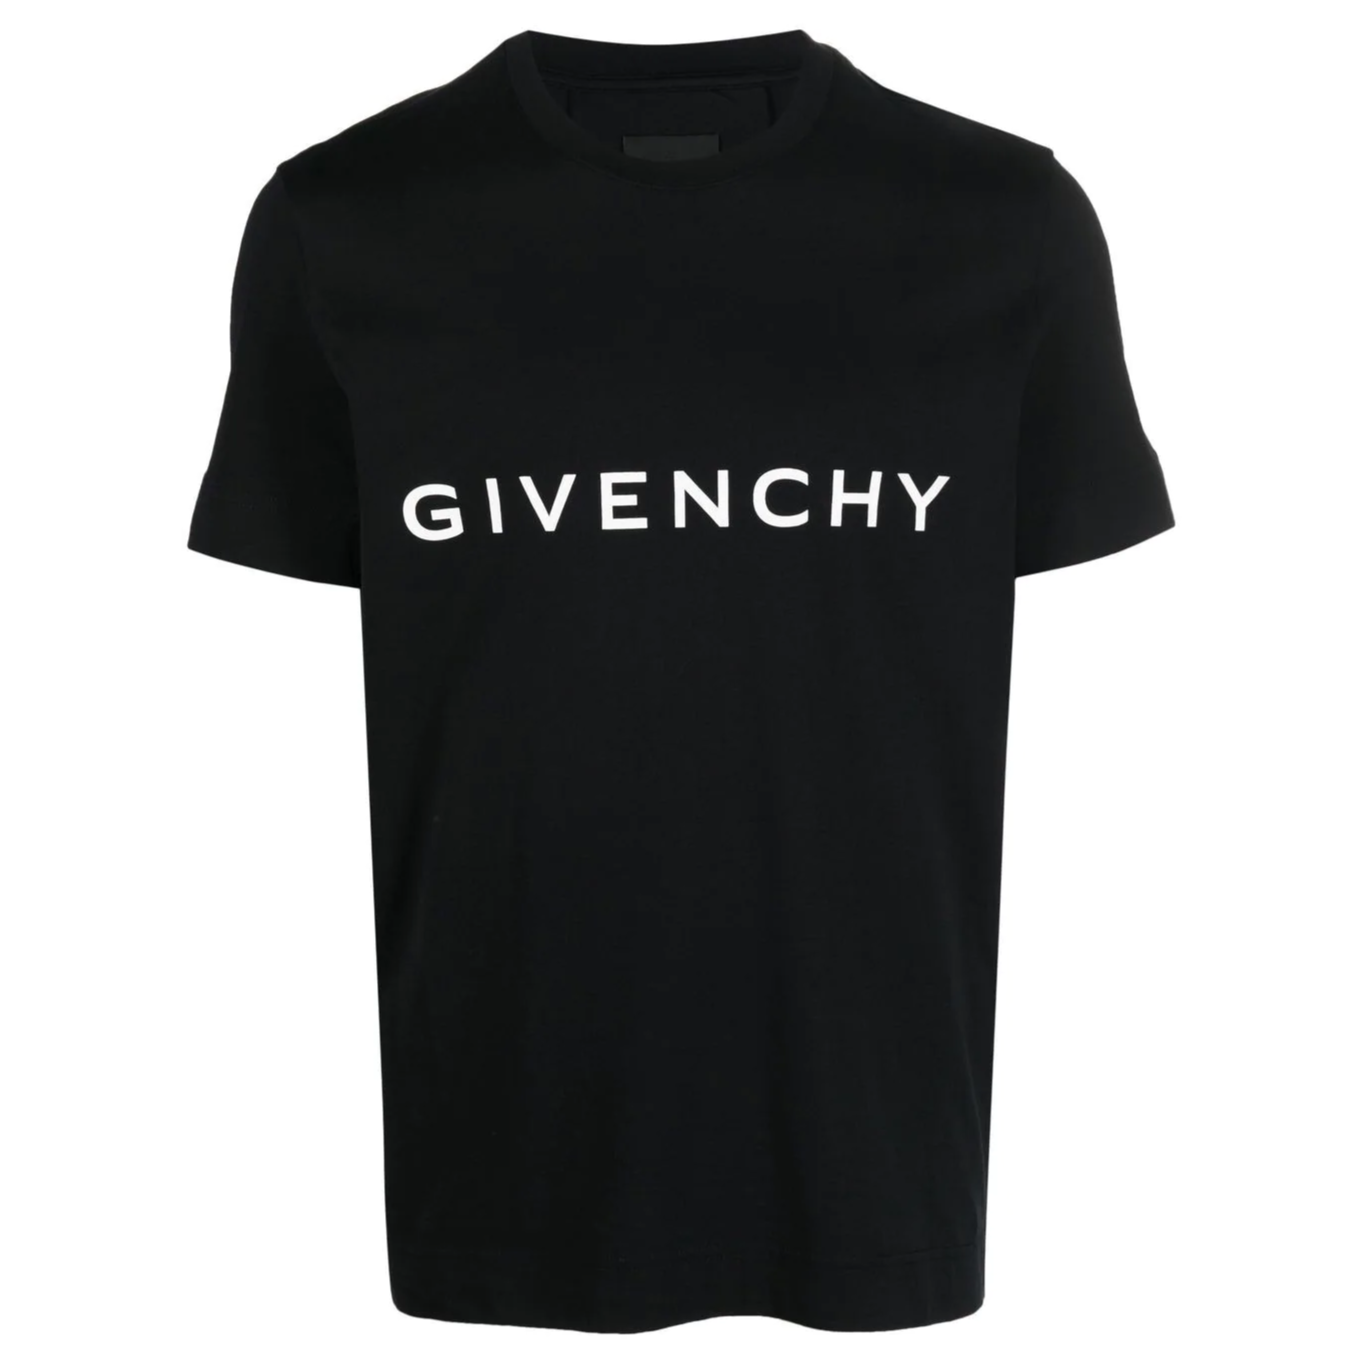 Total 38+ imagen how much is a givenchy shirt